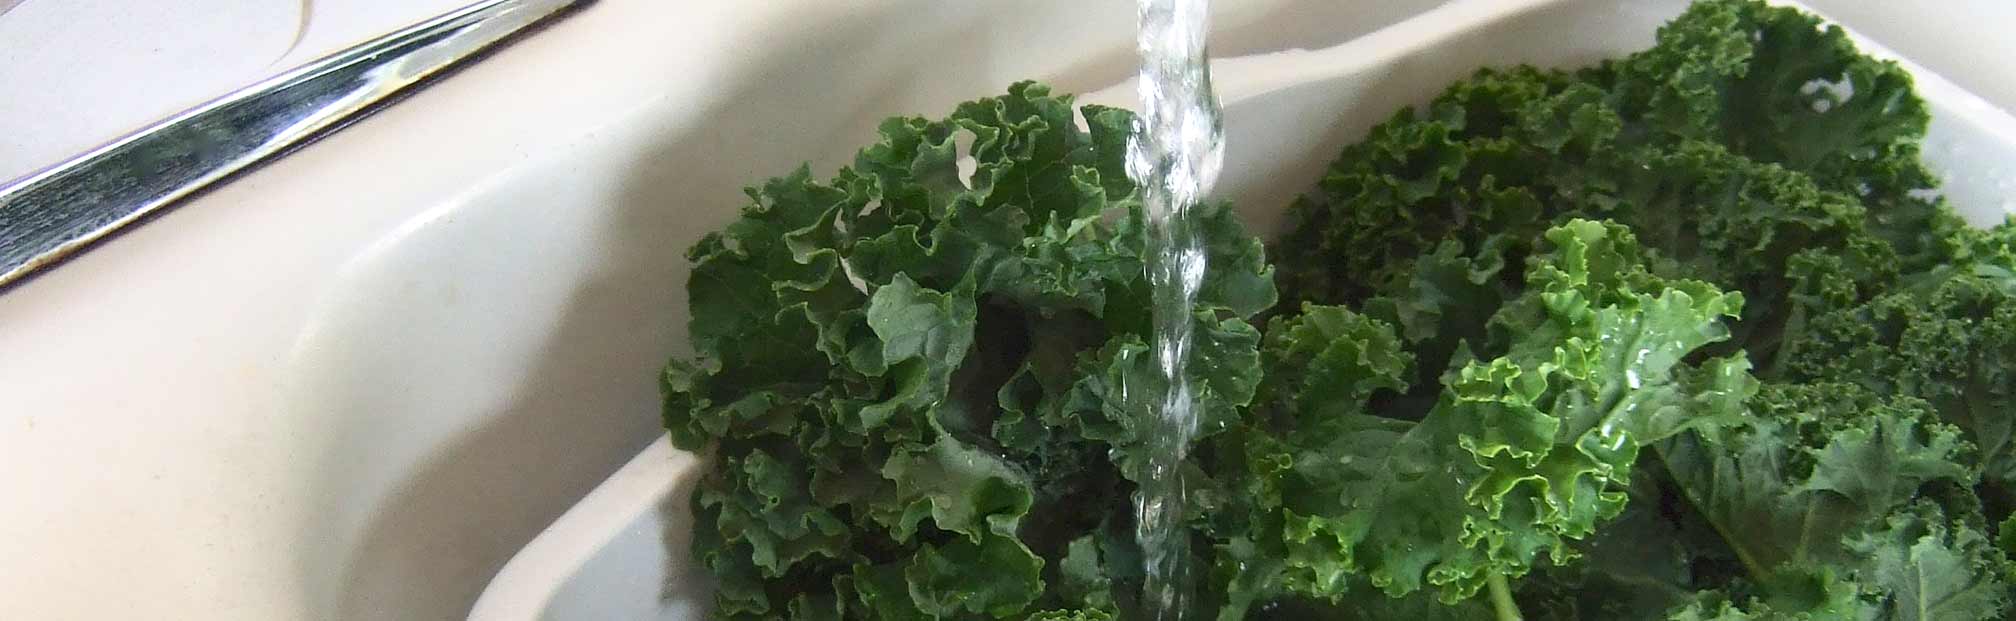 kale green washed in sink